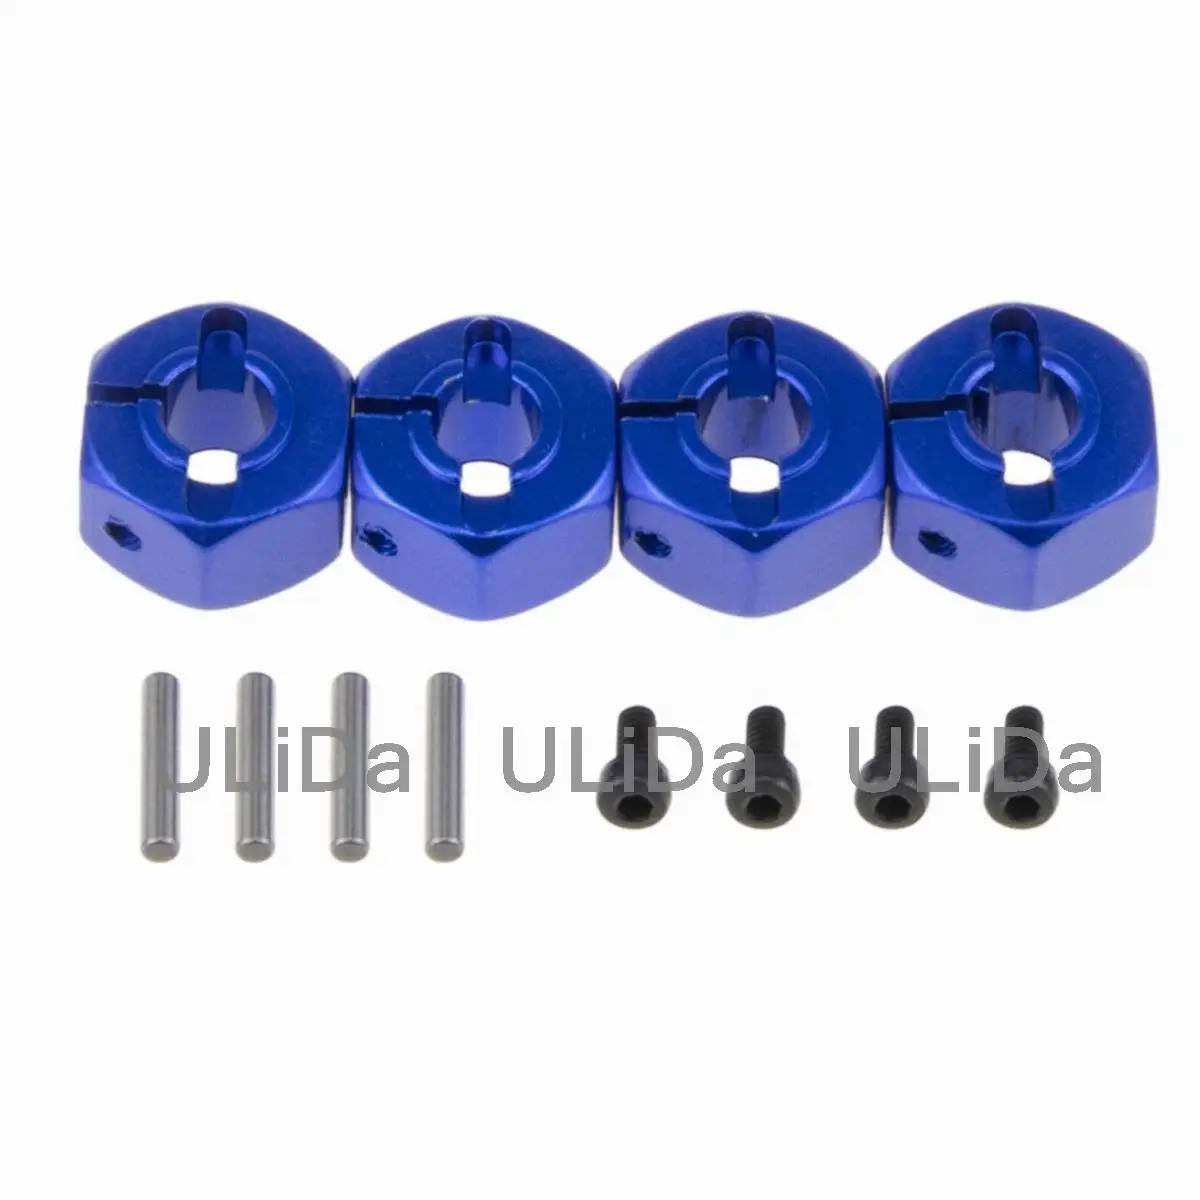 

1set RC Aluminum 7.0 Wheel Hex 12mm Drive with Pins Screws for HSP HPI Tamiya